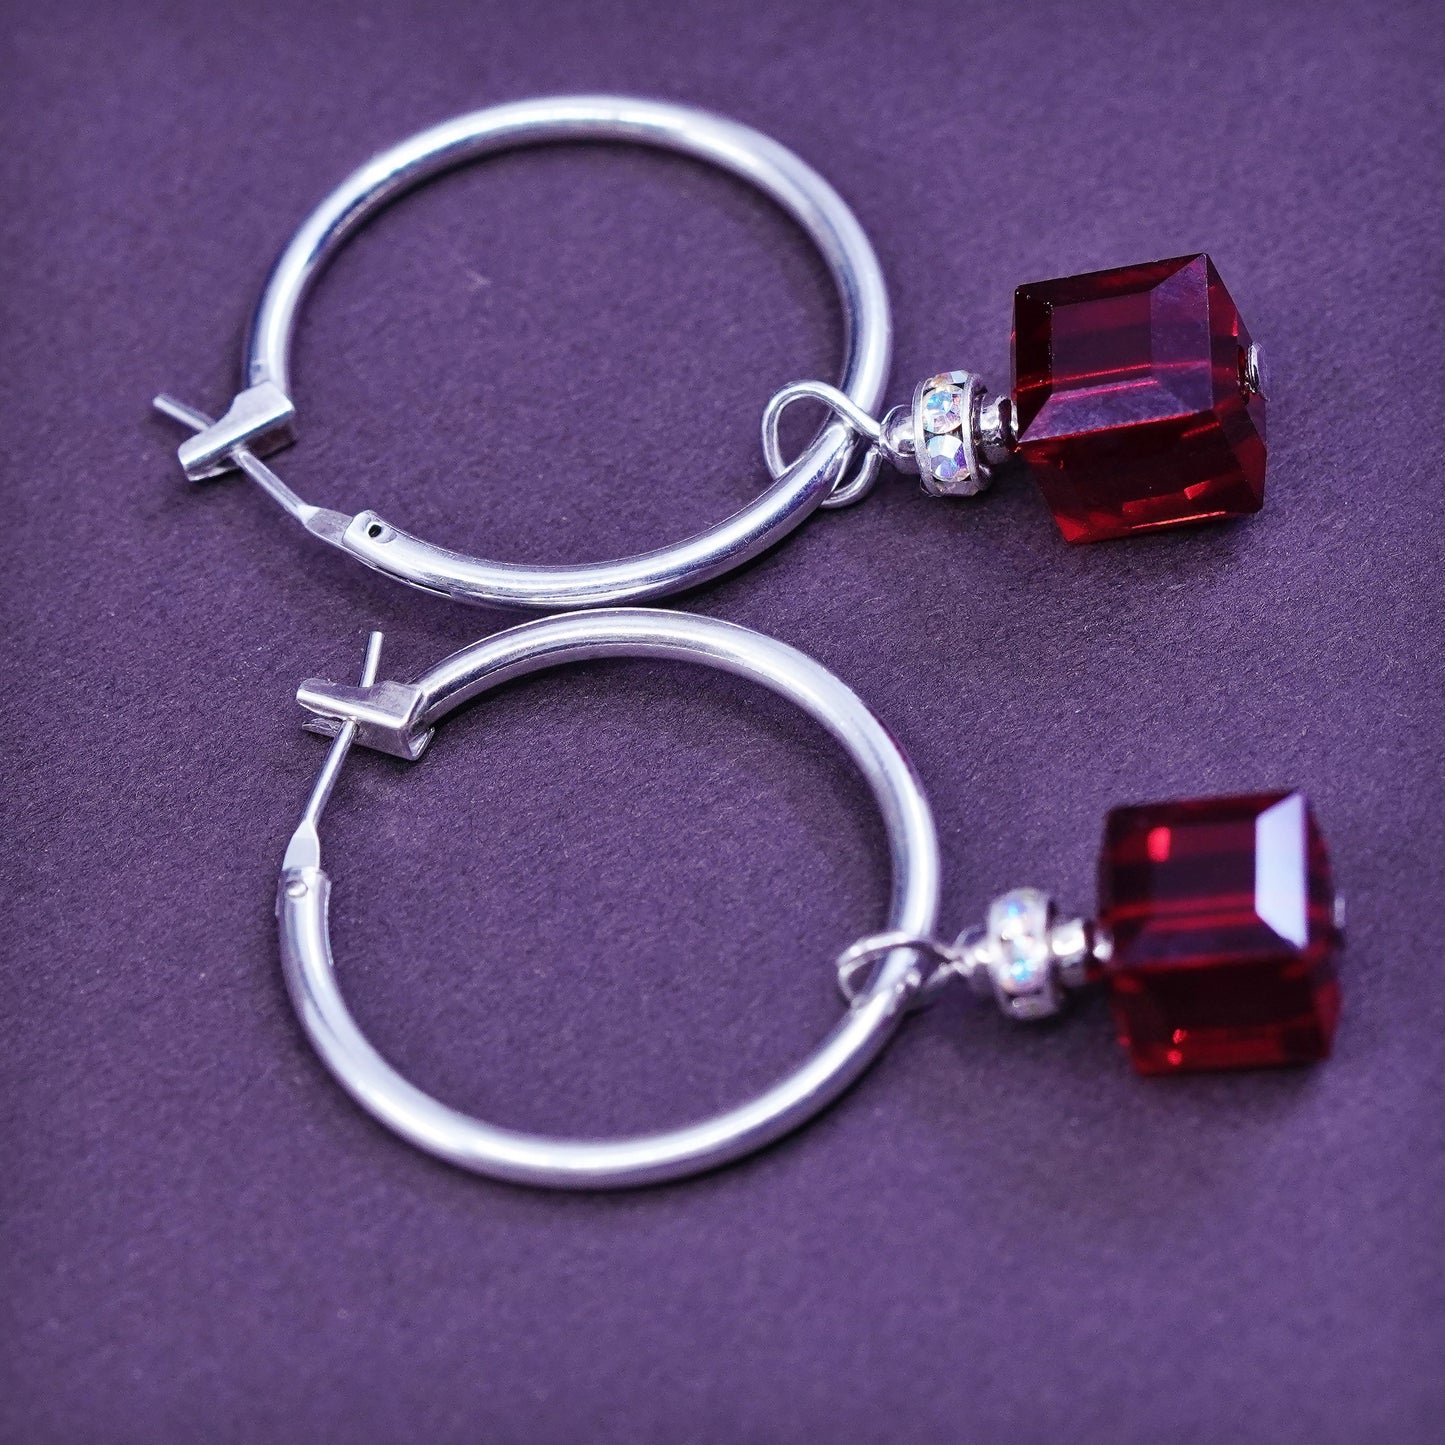 0.75”, vtg Sterling silver handmade hoops, 925 earrings with ruby cube and Cz